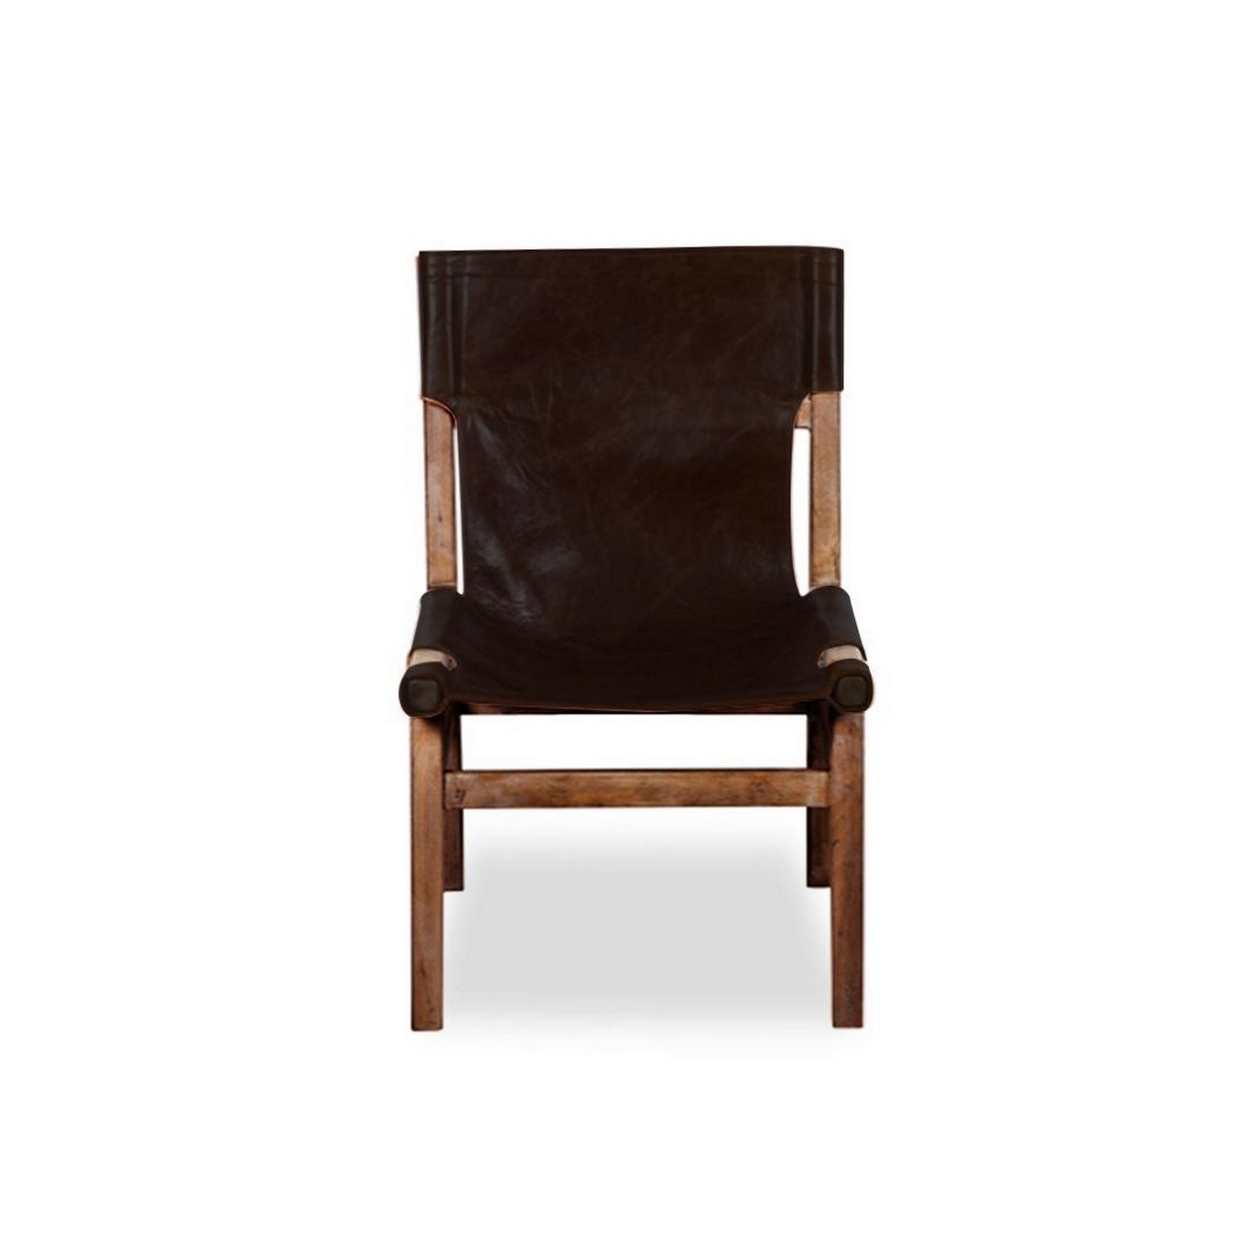 22 Inch Slingback Dining Chair, Brown Leather Seat, Distressed Wood Frame- Saltoro Sherpi